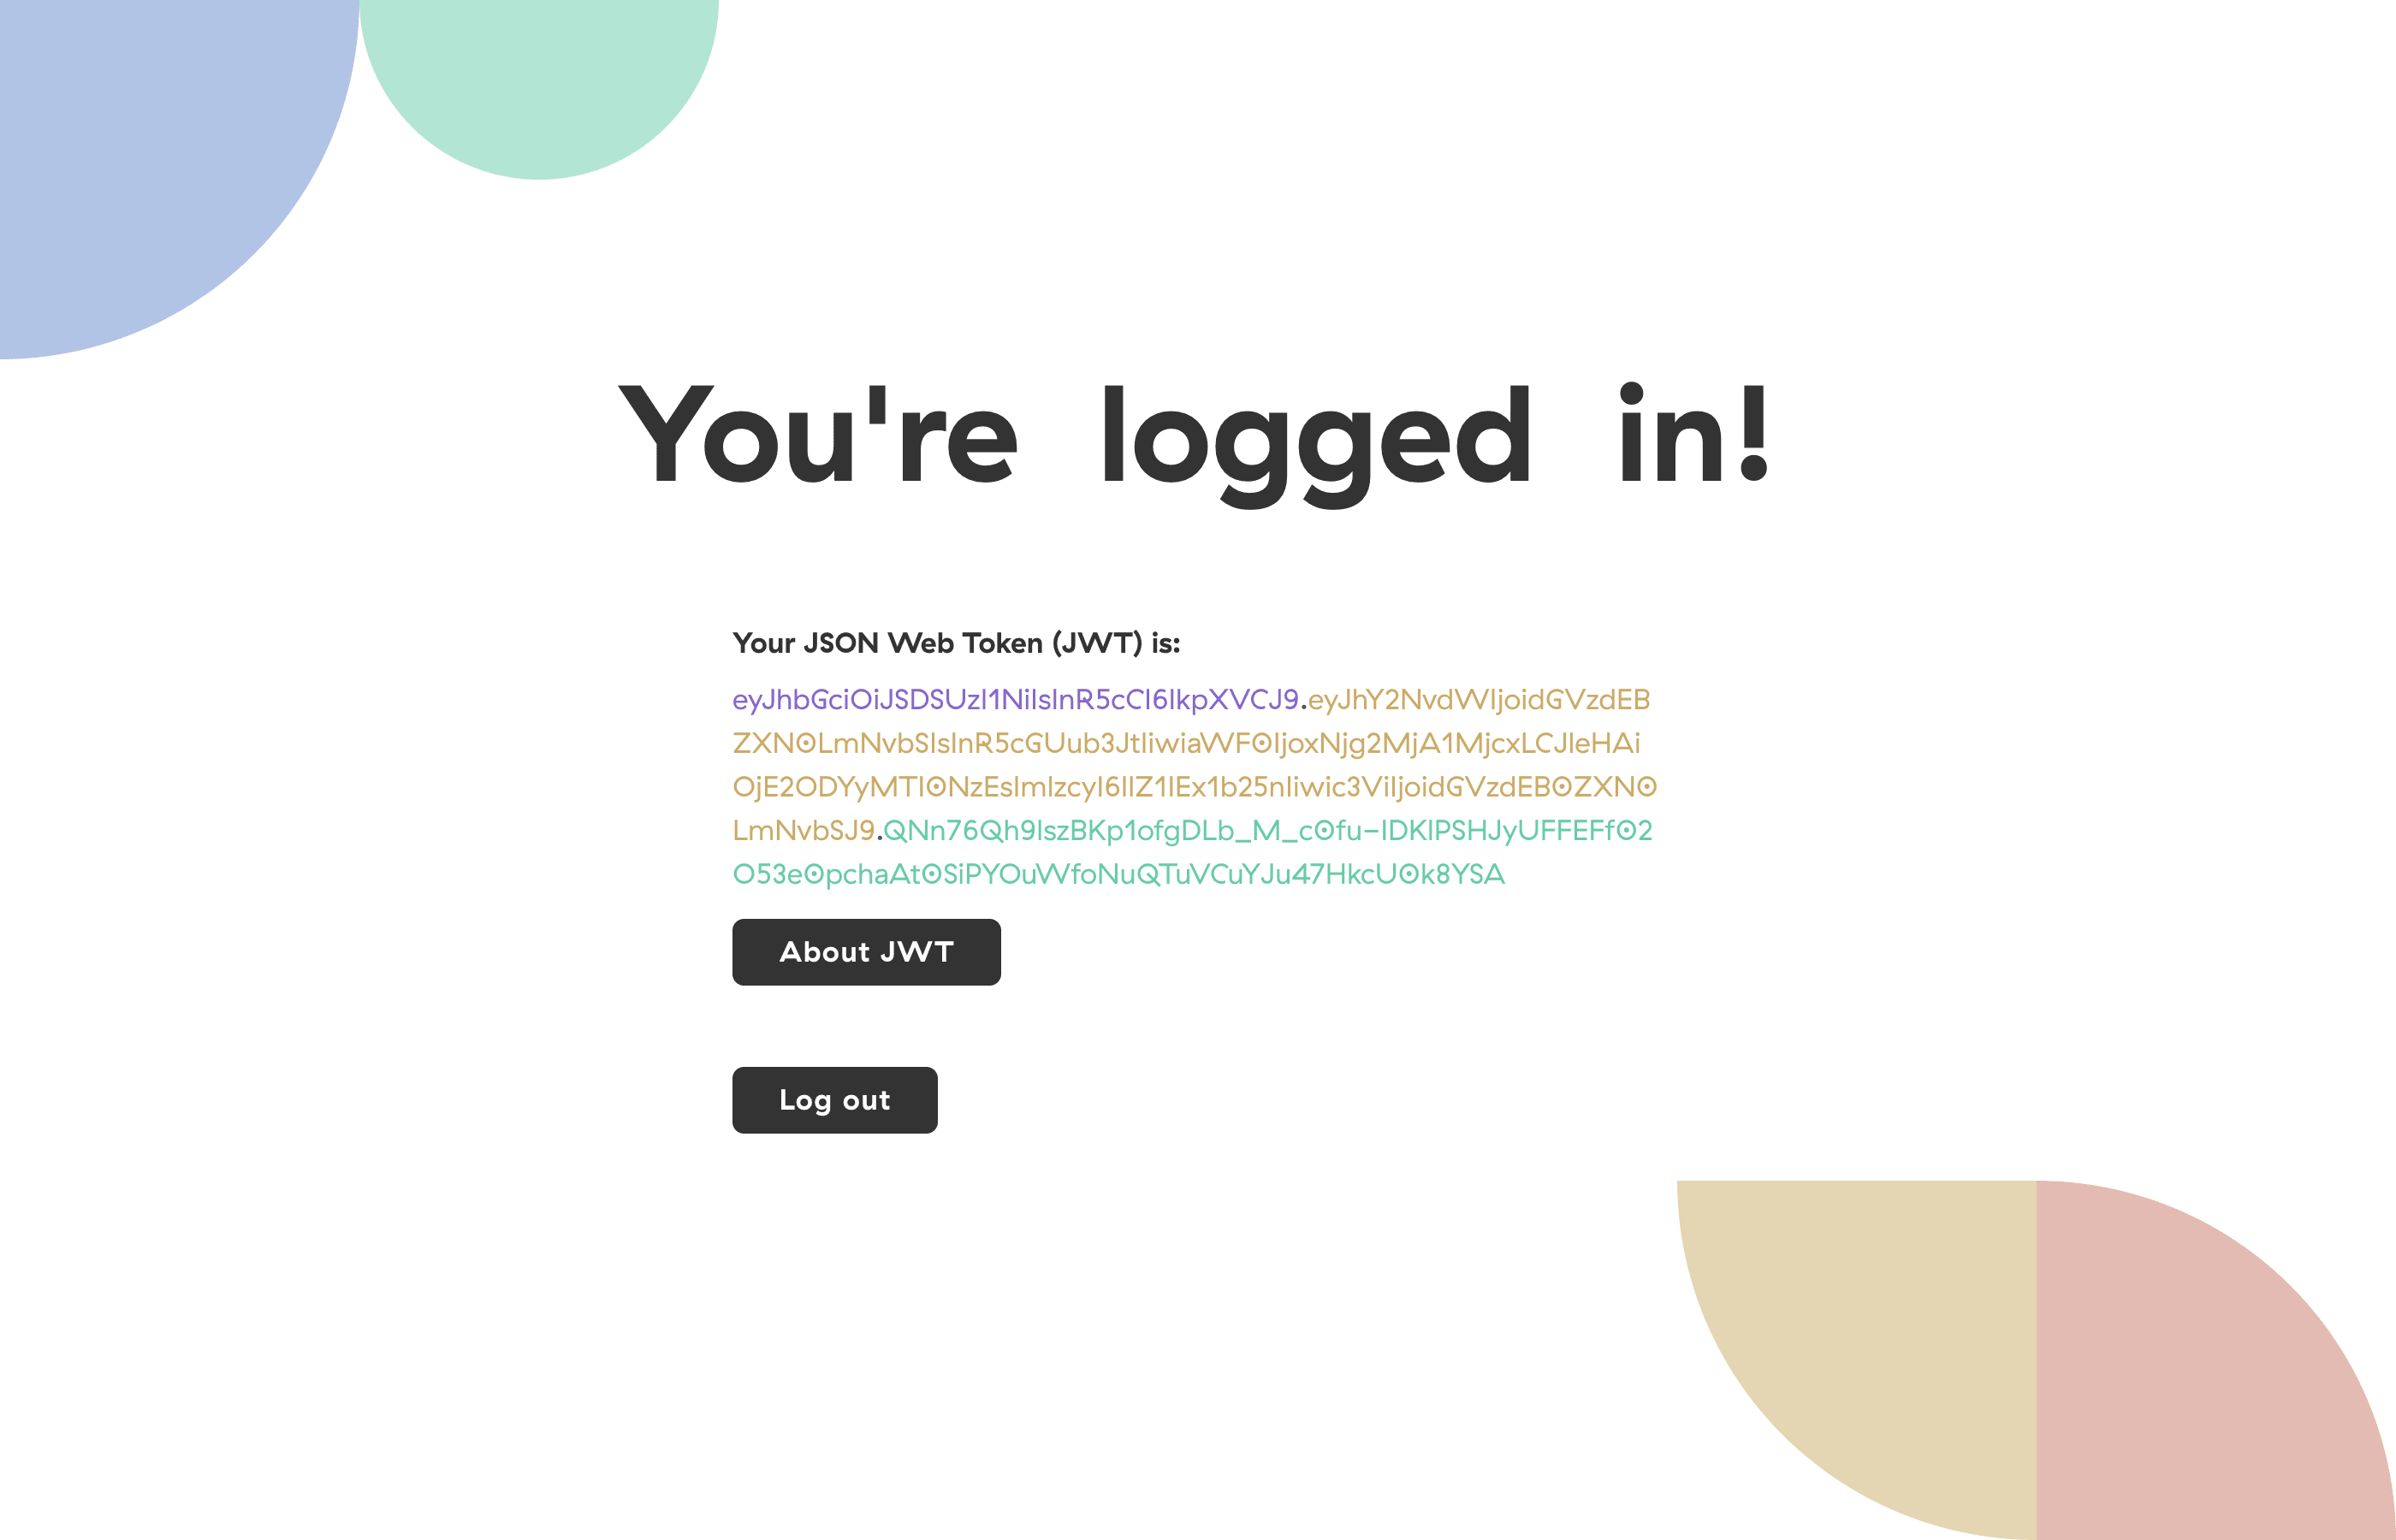 Main page in Sign displaying the JSON Web Token used for login